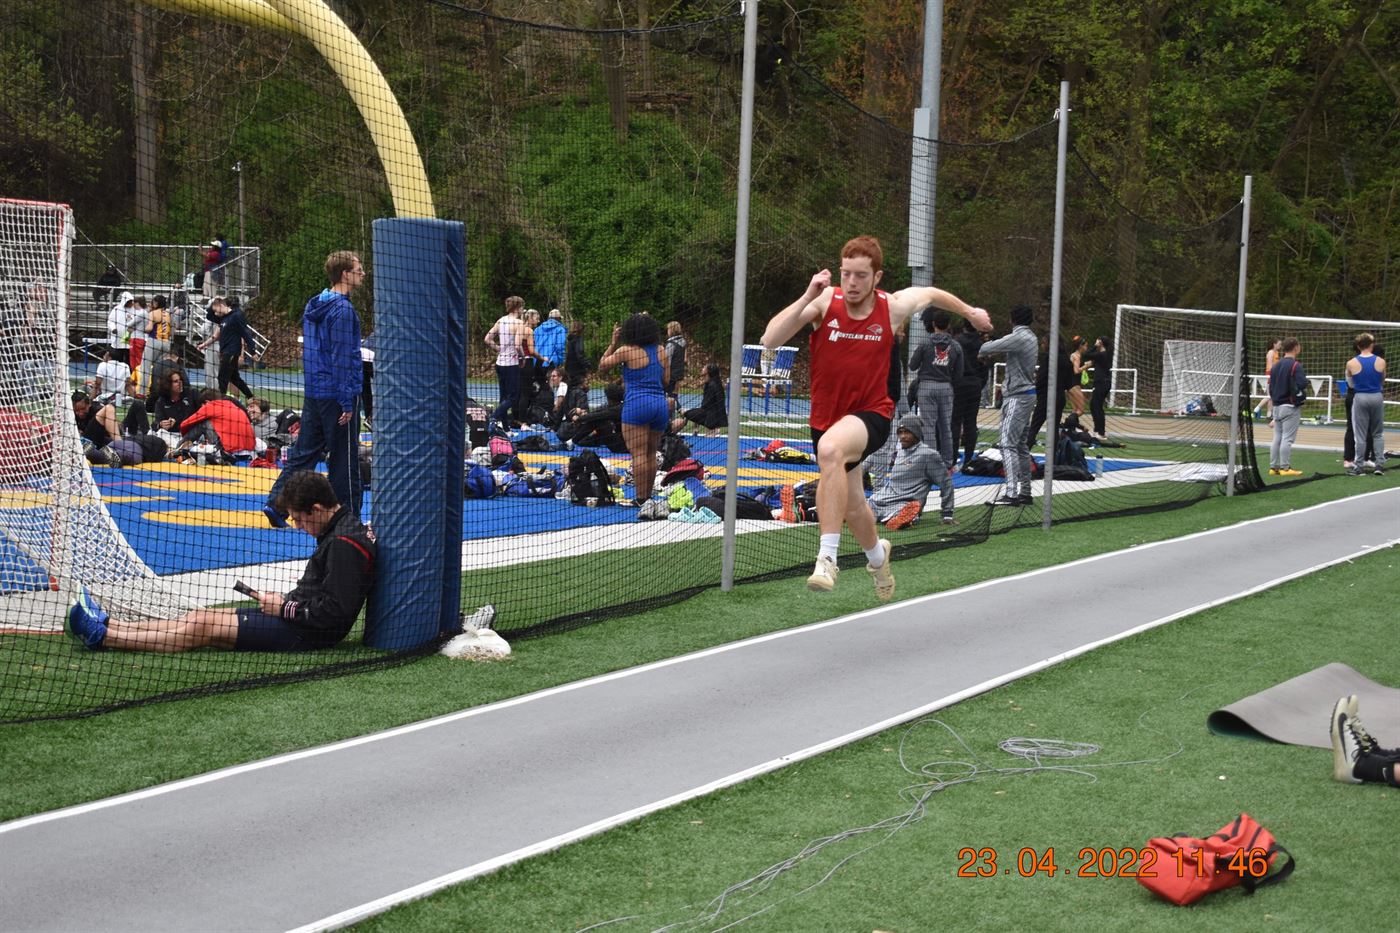 Anthony DiMaulo has placed first in the long jump in multiple events so far this year. Photo courtesy of Anthony DiMaulo